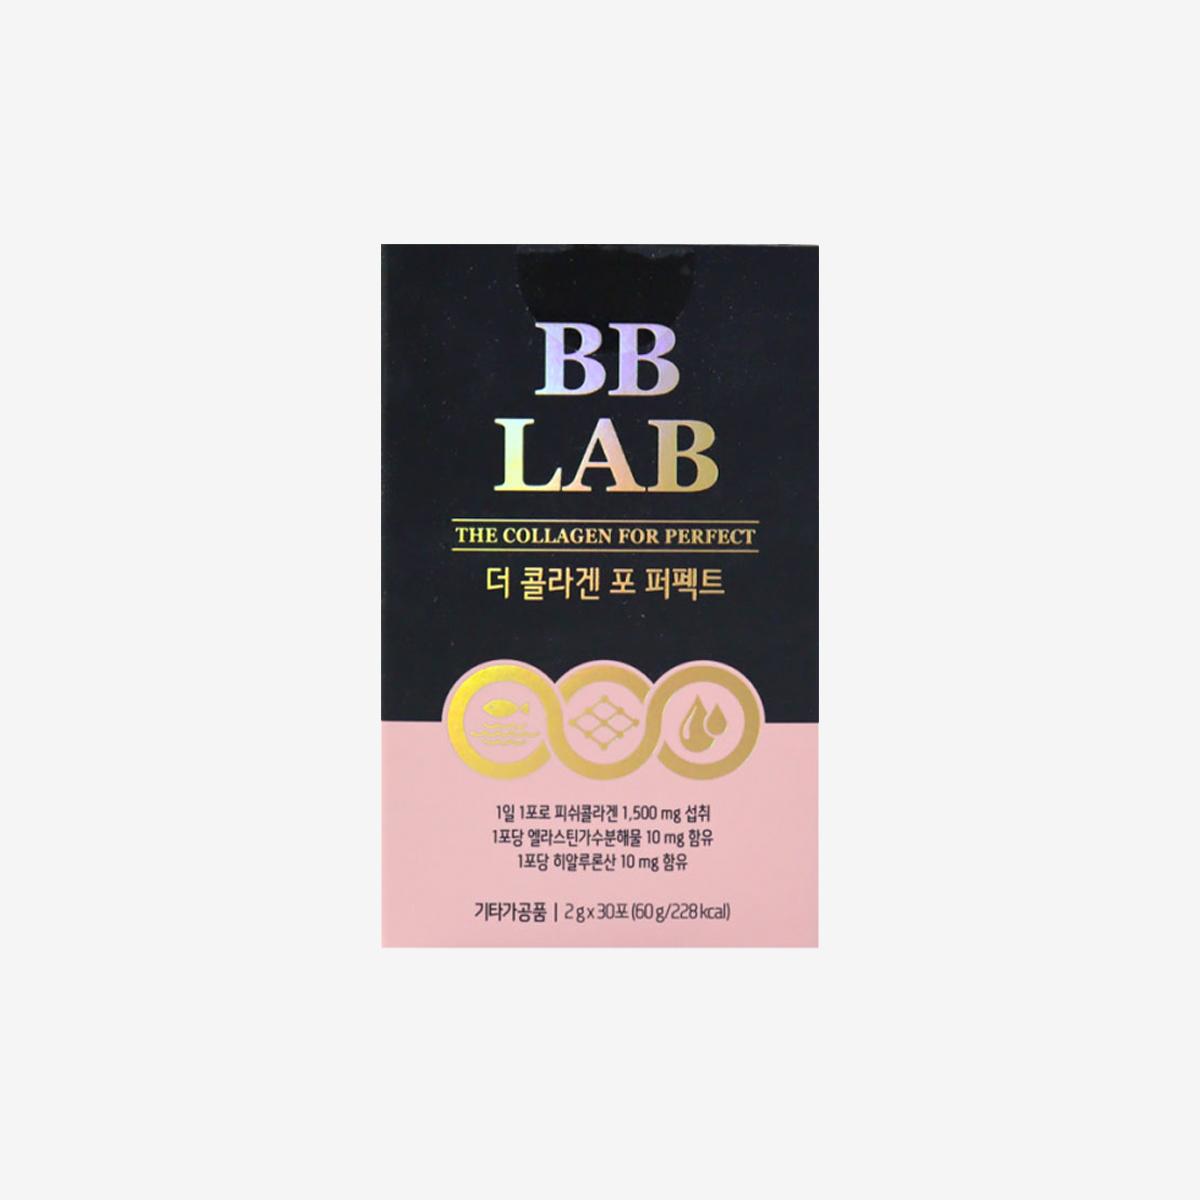 BB LAB The Collagen For Perfect (30 sticks)